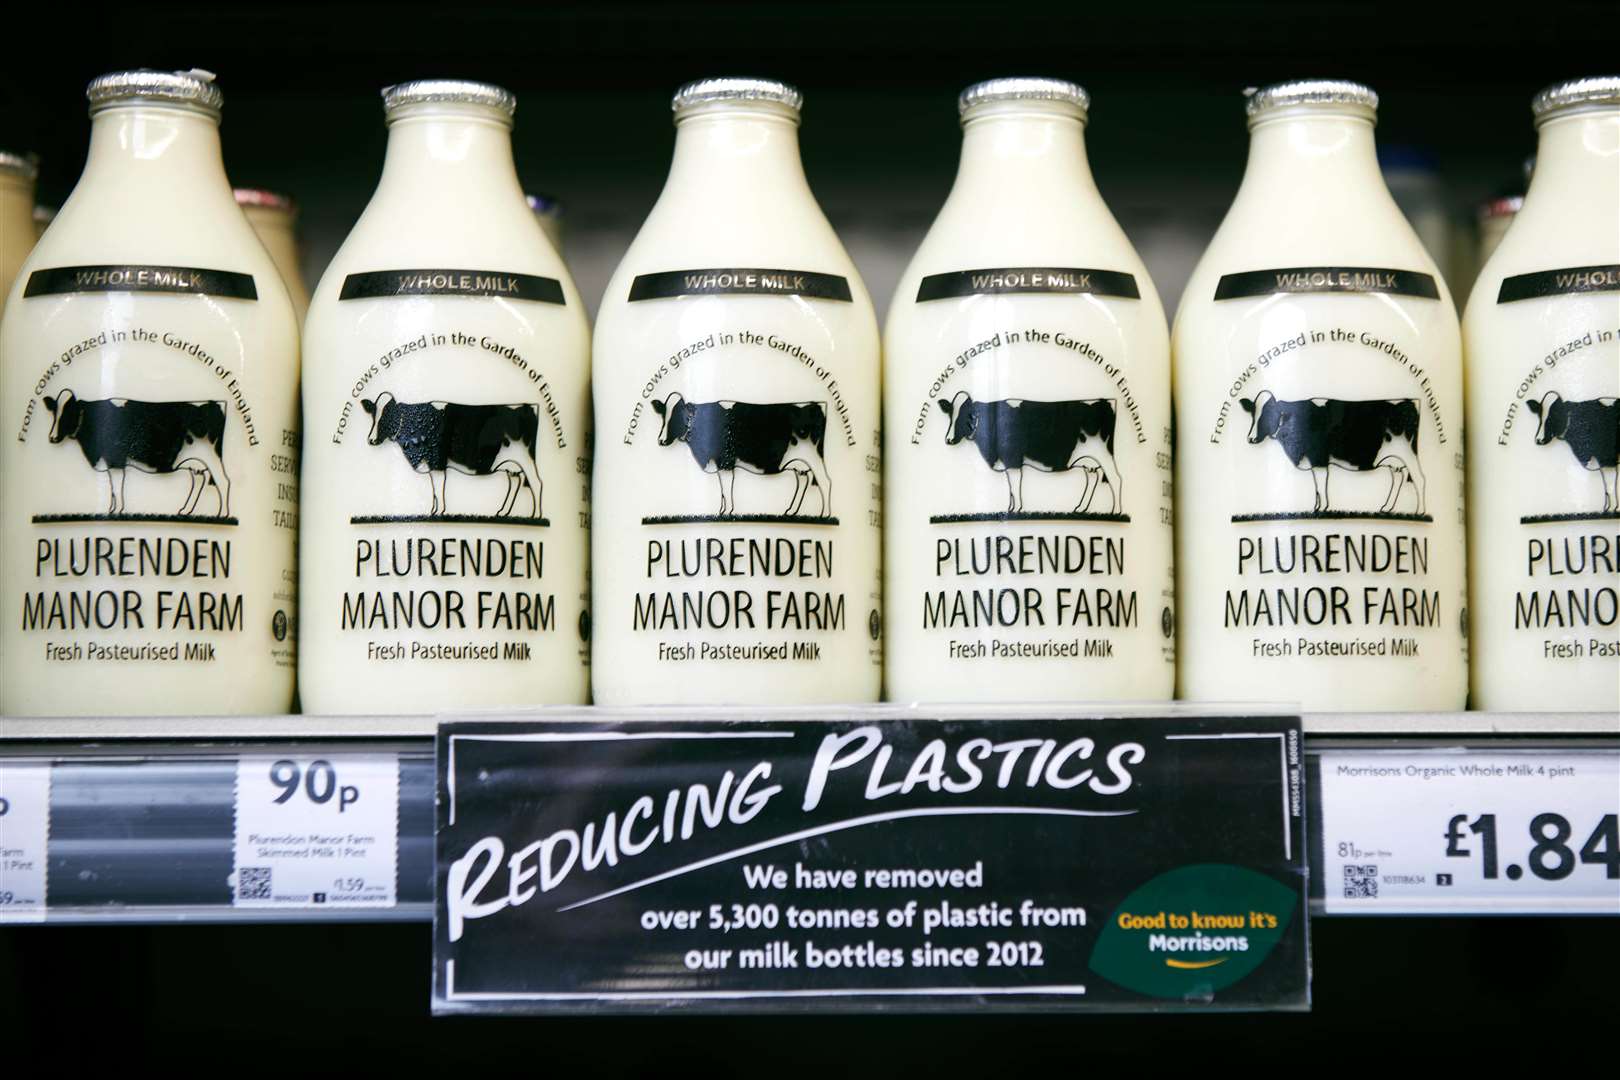 The introduction of traditional glass milk bottles is expected to remove 40,000 plastic bottles from stores per year